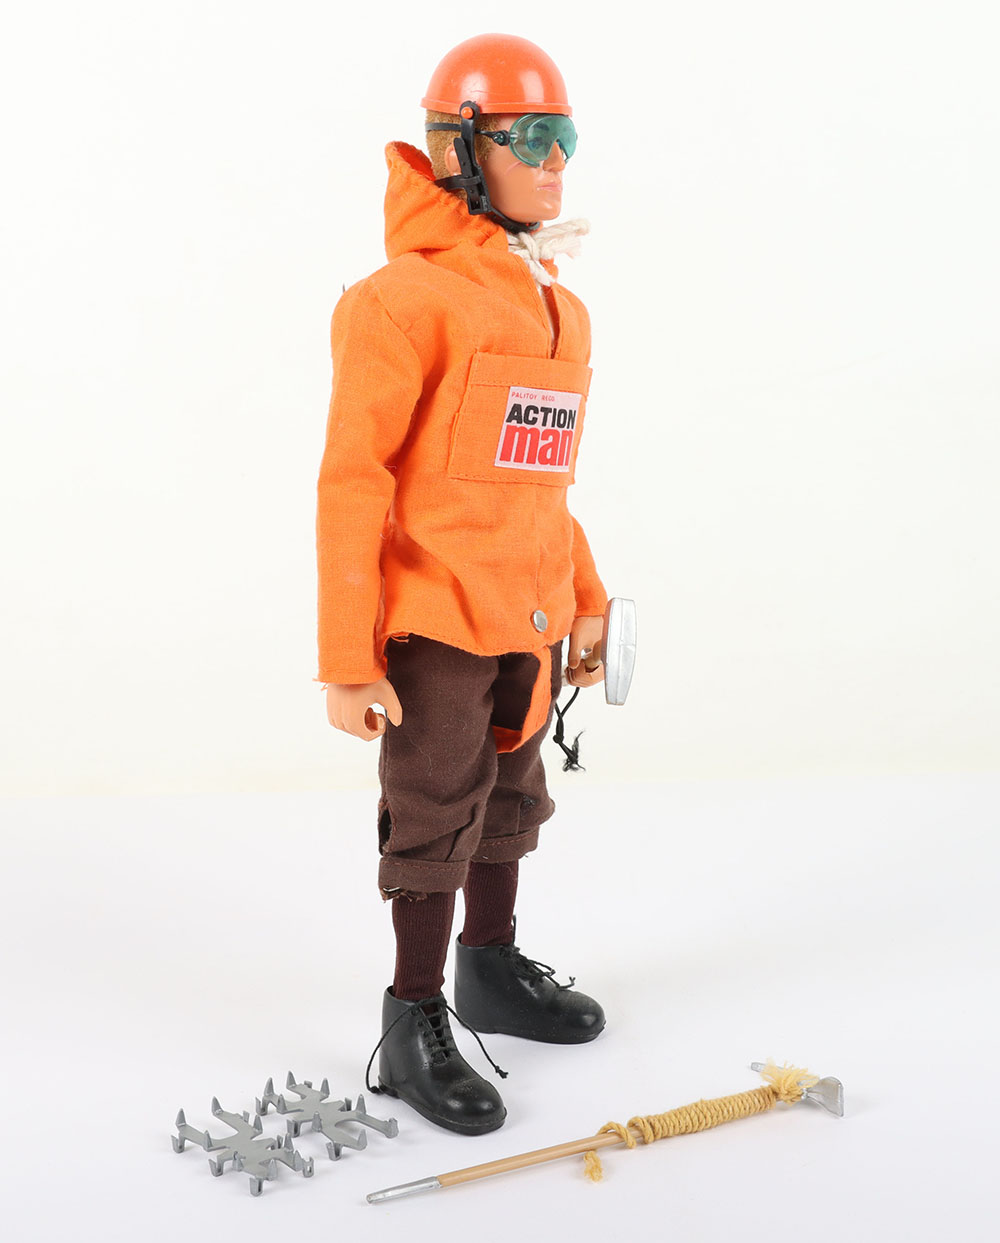 Mountain Rescue Vintage Action Man by Palitoy - Image 3 of 4